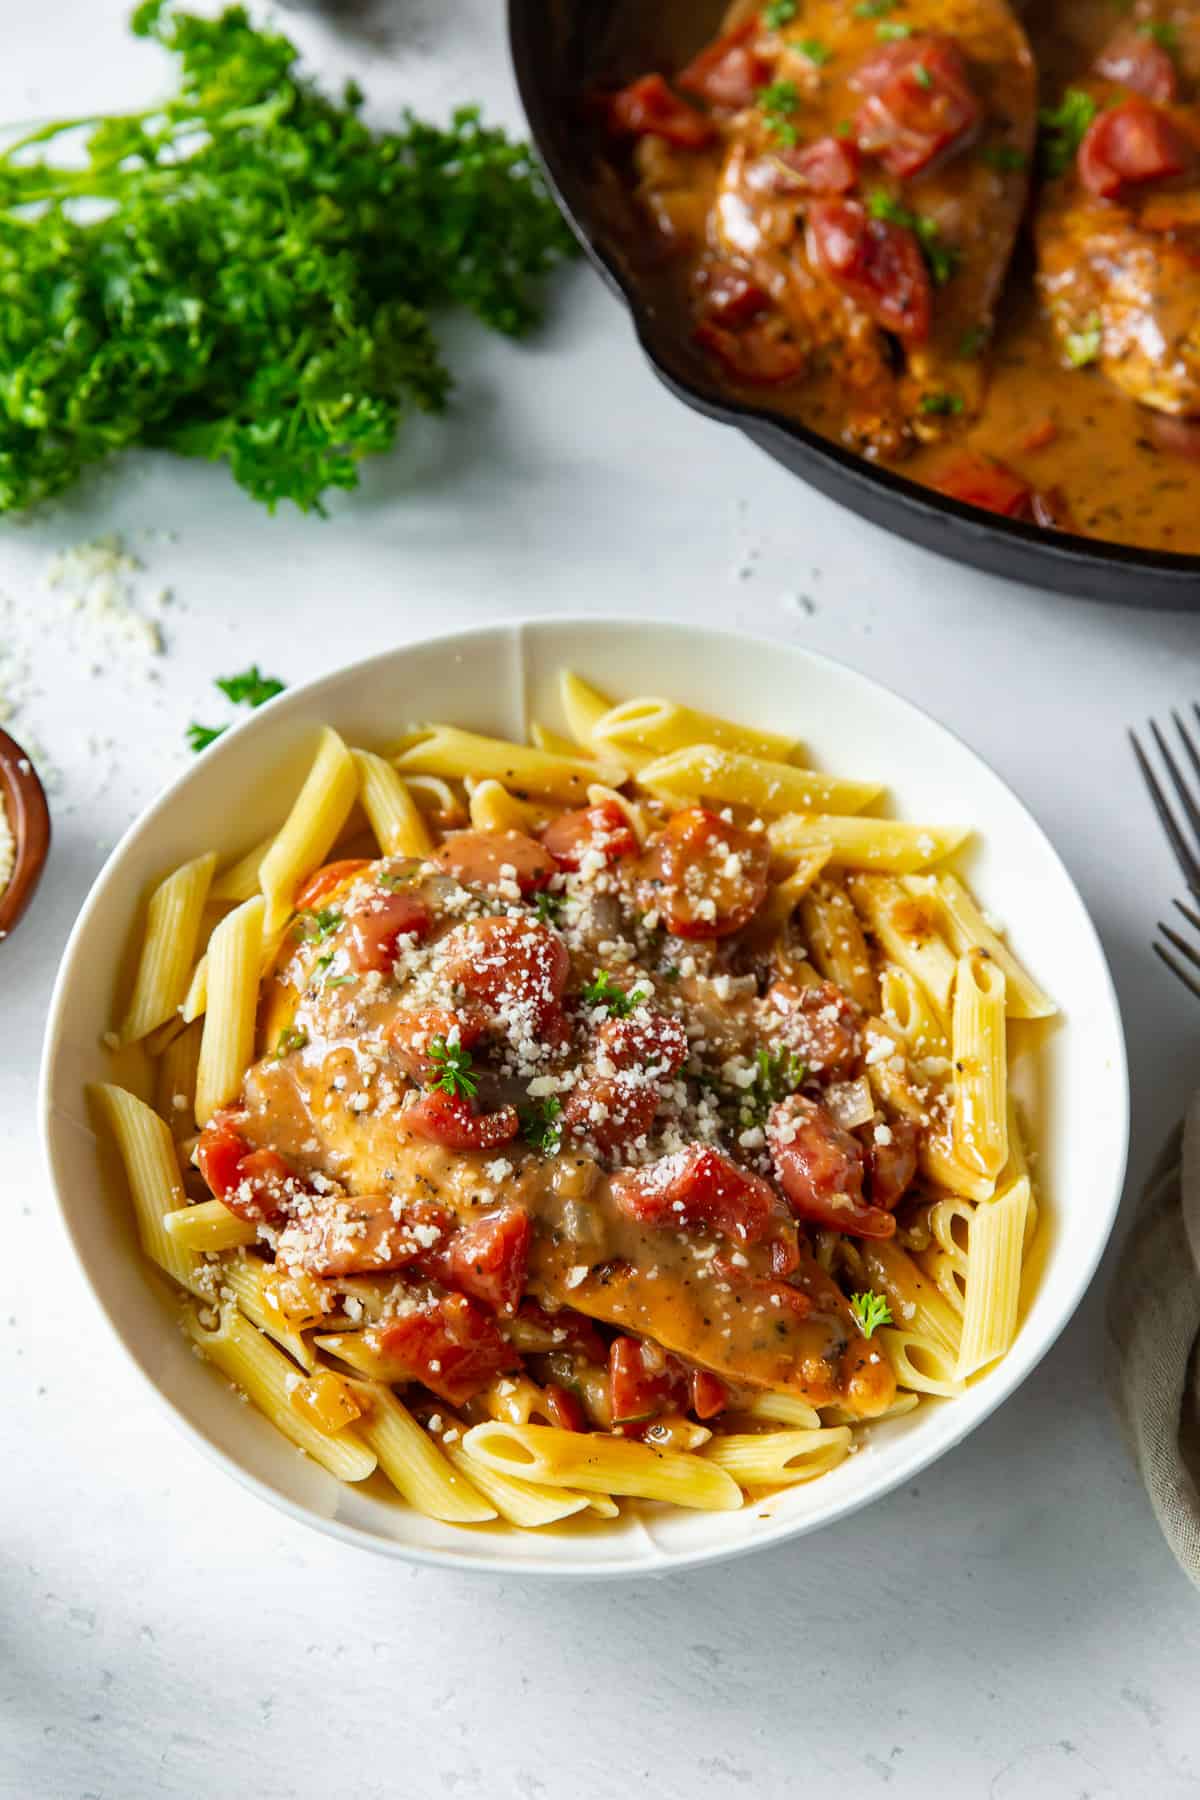 Chicken with tomatoes in sauce over cooked pasta in a bowl.